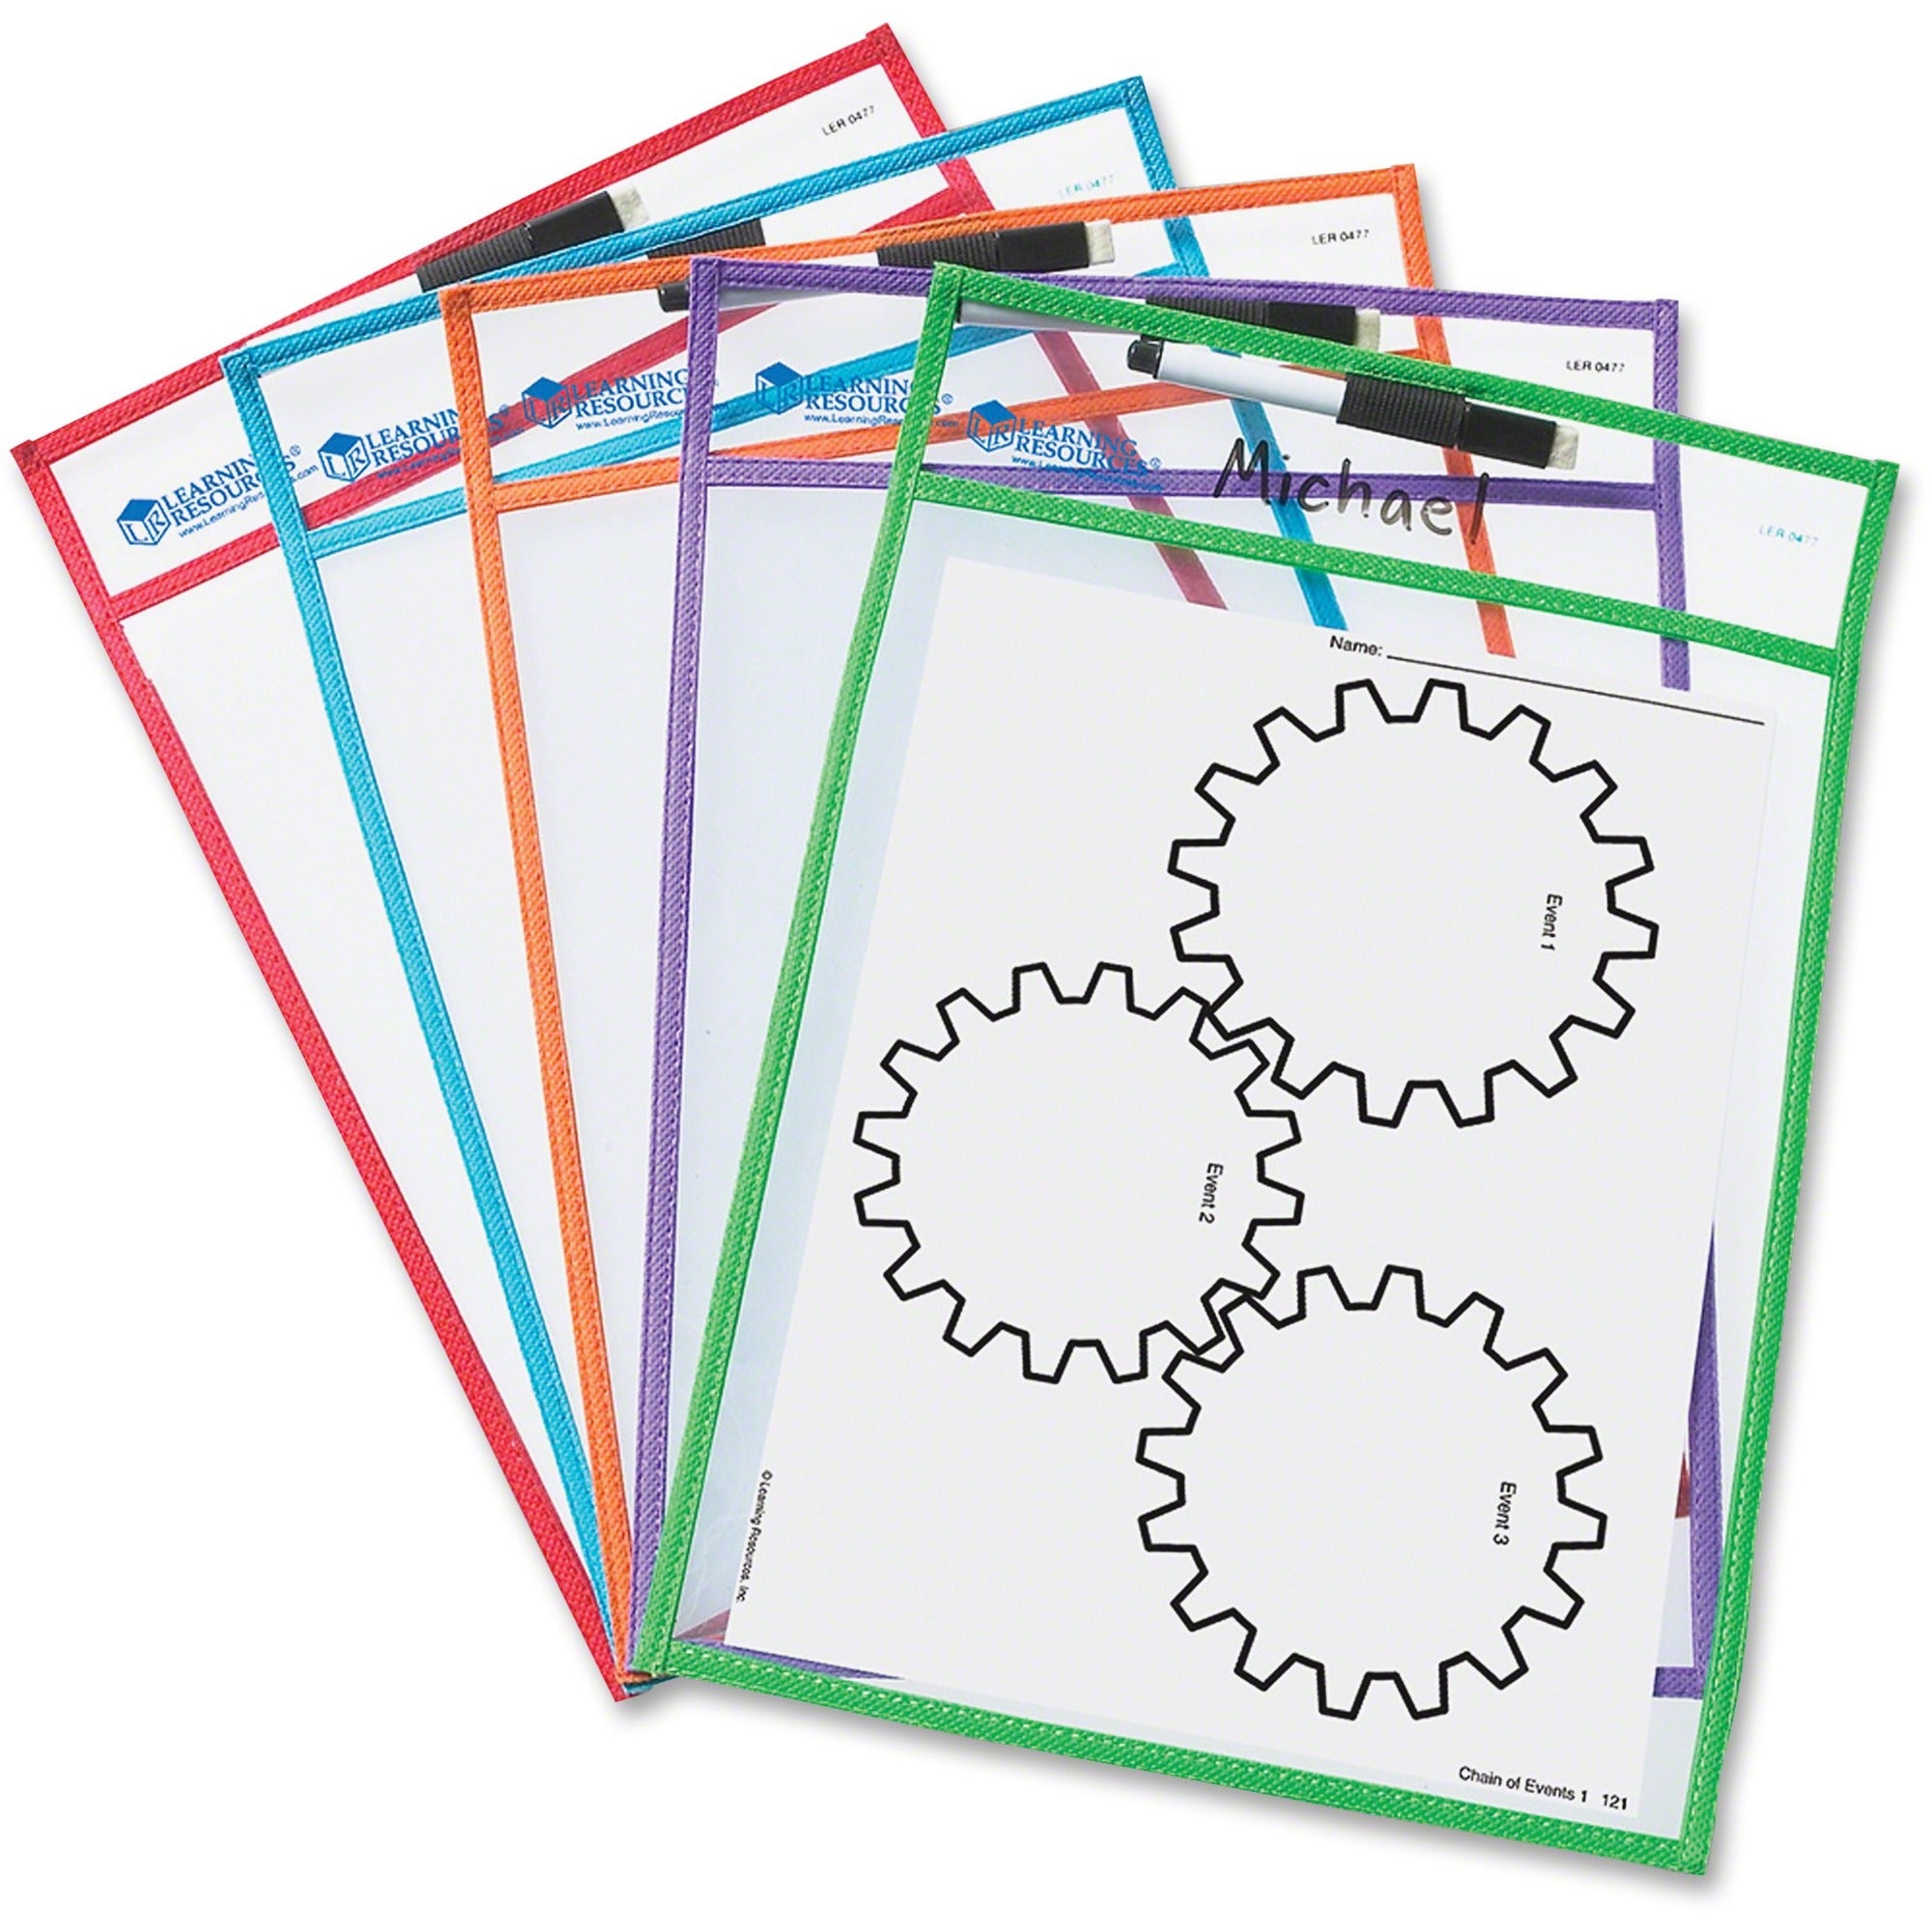 Learning Resources Write-and-wipe Pockets - White Surface - Portable - Reusable - 5 / Set - 